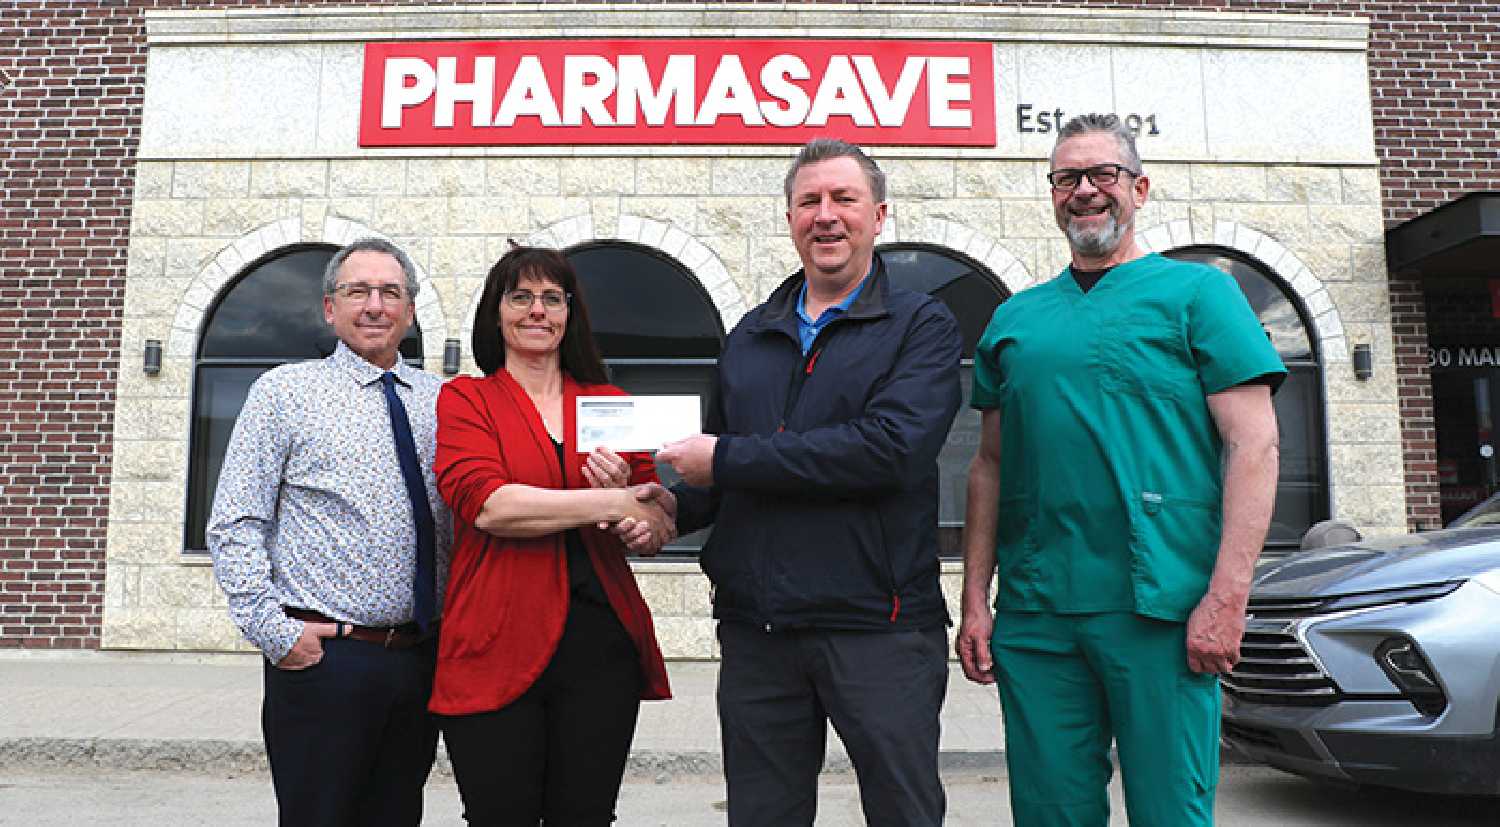 Darcy Rambold of Moosomin Pharmasave is donating $100,000 to the Moosomin Airport Expansion project. From left are Jeff St. Onge of the Airport Fundraising Committee, RM of Moosomin CAO Kendra Lawrence, Darcy Rambold of Moosomin Pharmasave, and Dr. Van of the Airport Fundraising Committee.